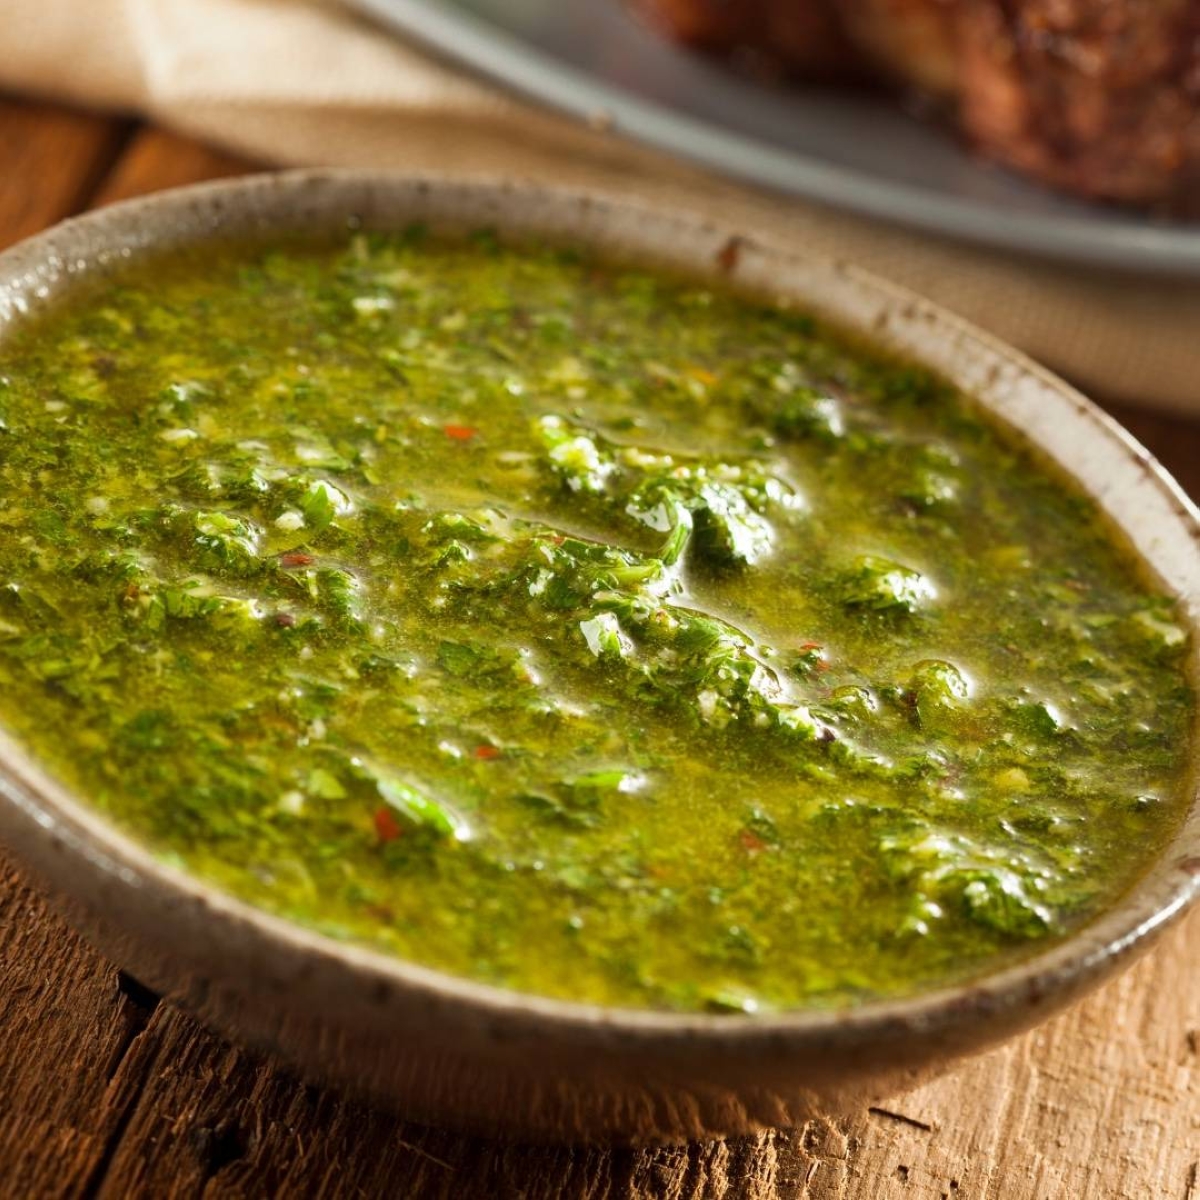 Chimichurri goes well on almost everything.